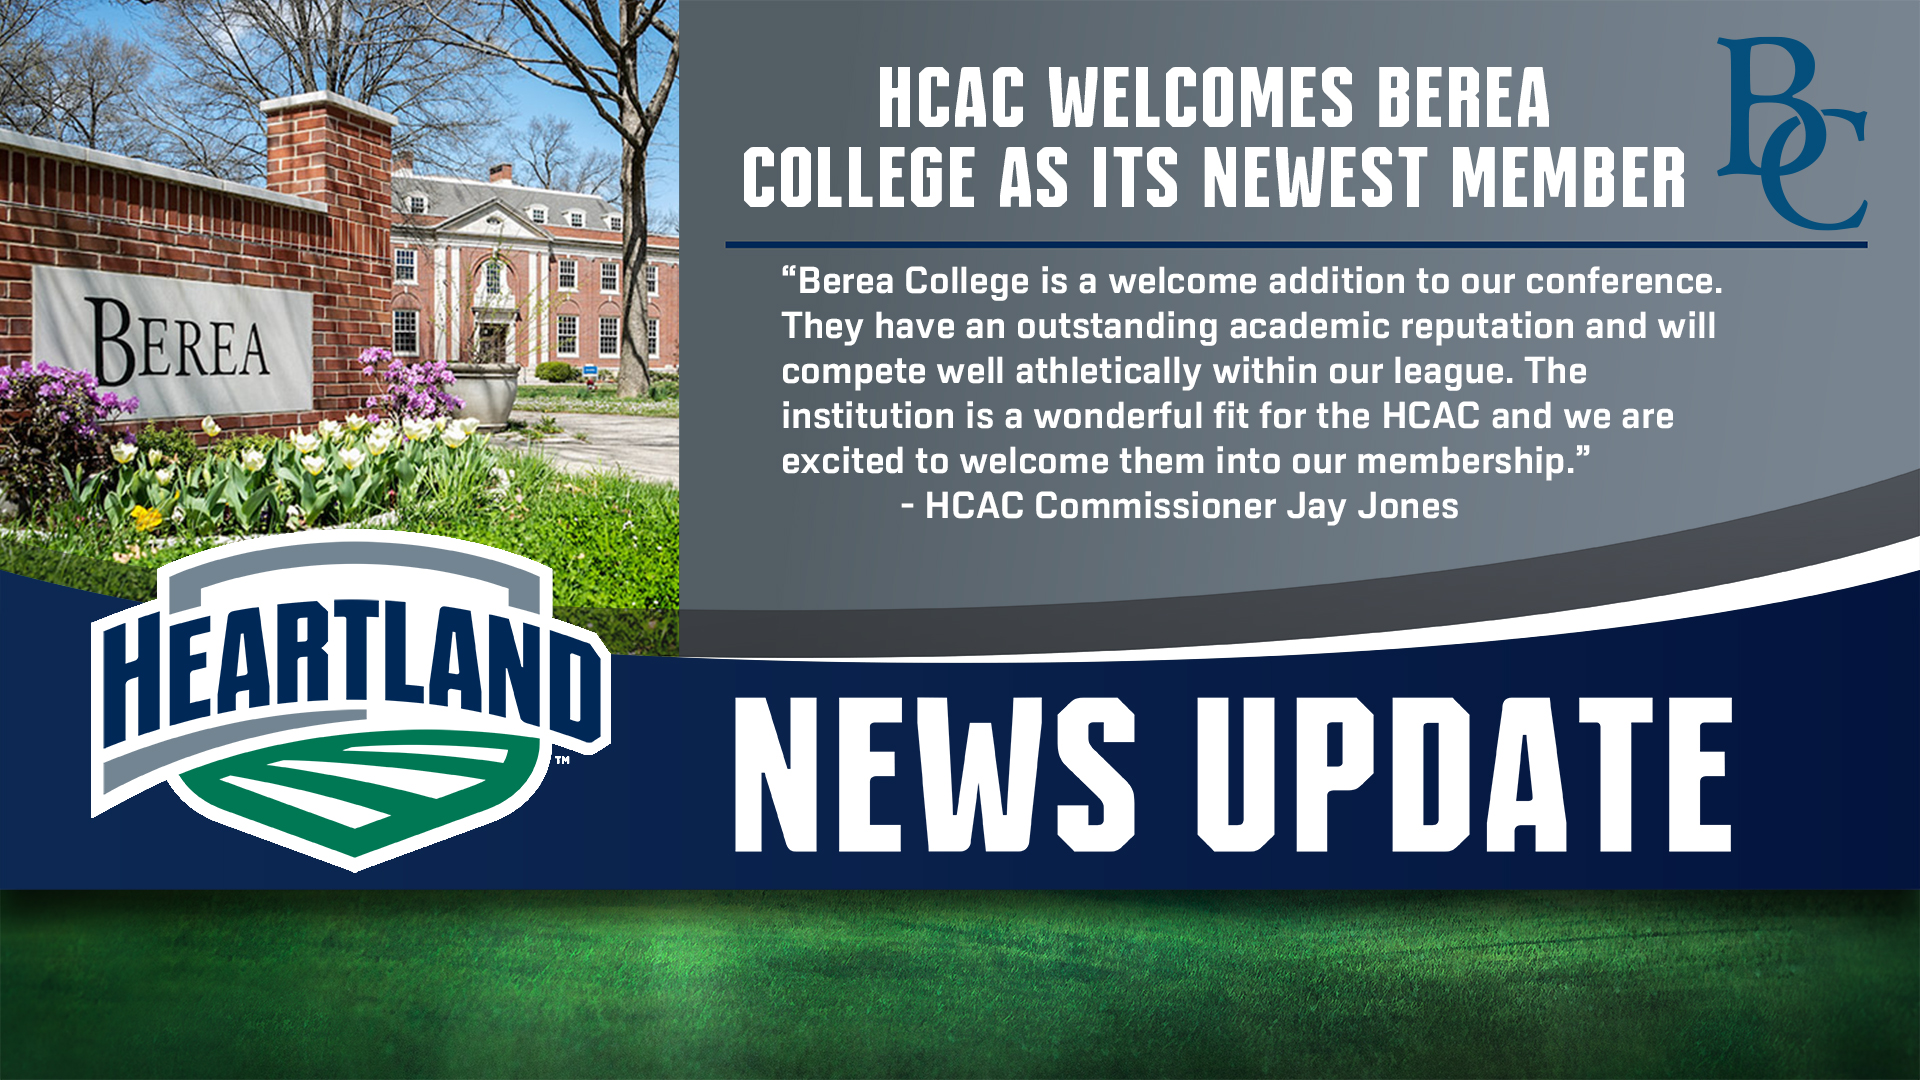 HCAC Welcomes Berea College as its Newest Member